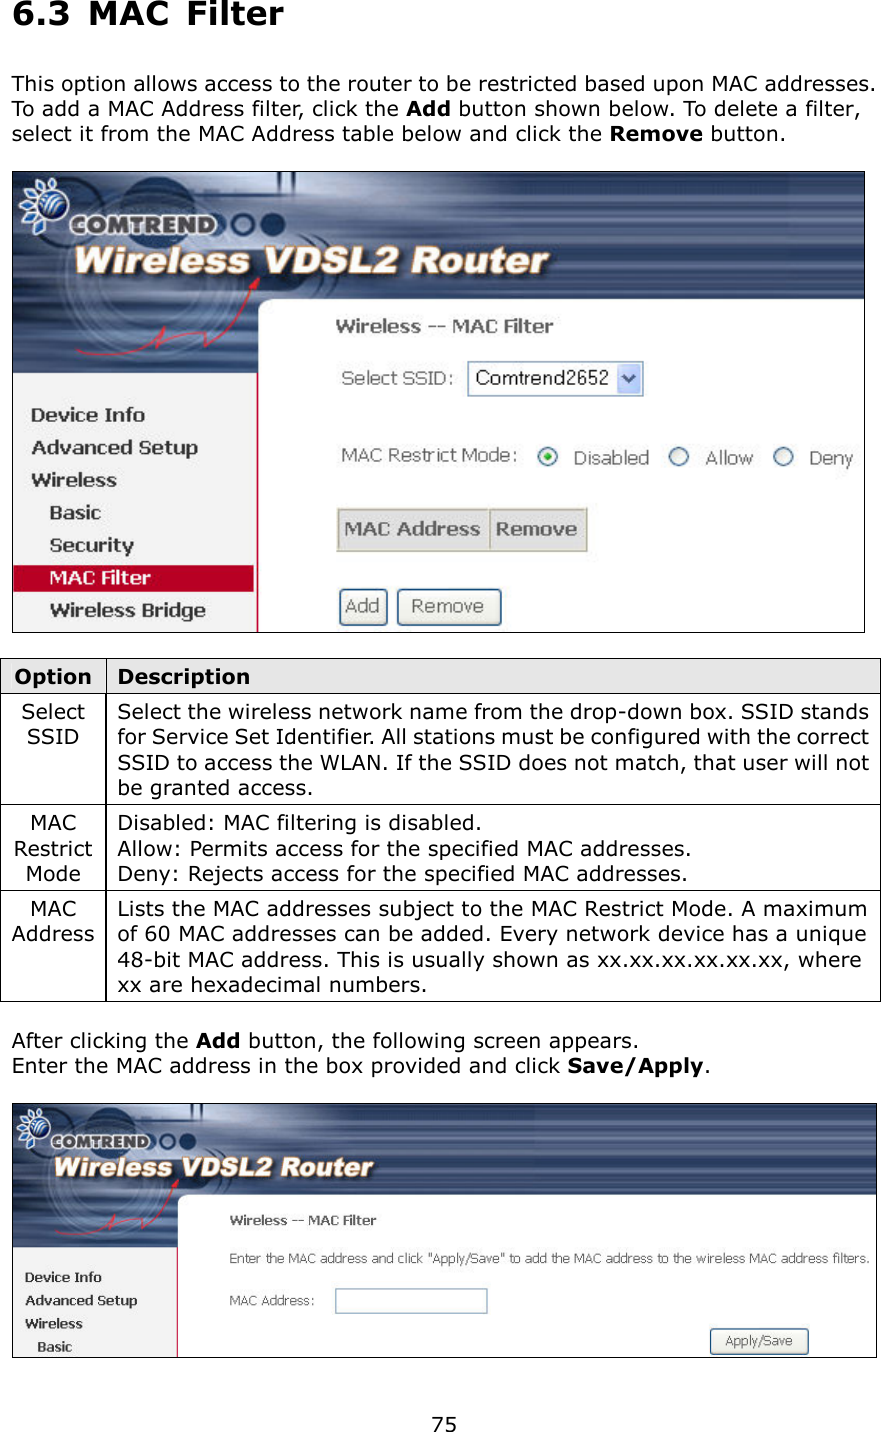   75 6.3  MAC  Filter This option allows access to the router to be restricted based upon MAC addresses.   To add a MAC Address filter, click the Add button shown below. To delete a filter, select it from the MAC Address table below and click the Remove button.    Option Description Select SSID Select the wireless network name from the drop-down box. SSID stands for Service Set Identifier. All stations must be configured with the correct SSID to access the WLAN. If the SSID does not match, that user will not be granted access. MAC Restrict Mode Disabled: MAC filtering is disabled. Allow: Permits access for the specified MAC addresses. Deny: Rejects access for the specified MAC addresses. MAC Address Lists the MAC addresses subject to the MAC Restrict Mode. A maximum of 60 MAC addresses can be added. Every network device has a unique 48-bit MAC address. This is usually shown as xx.xx.xx.xx.xx.xx, where xx are hexadecimal numbers.      After clicking the Add button, the following screen appears.     Enter the MAC address in the box provided and click Save/Apply.   